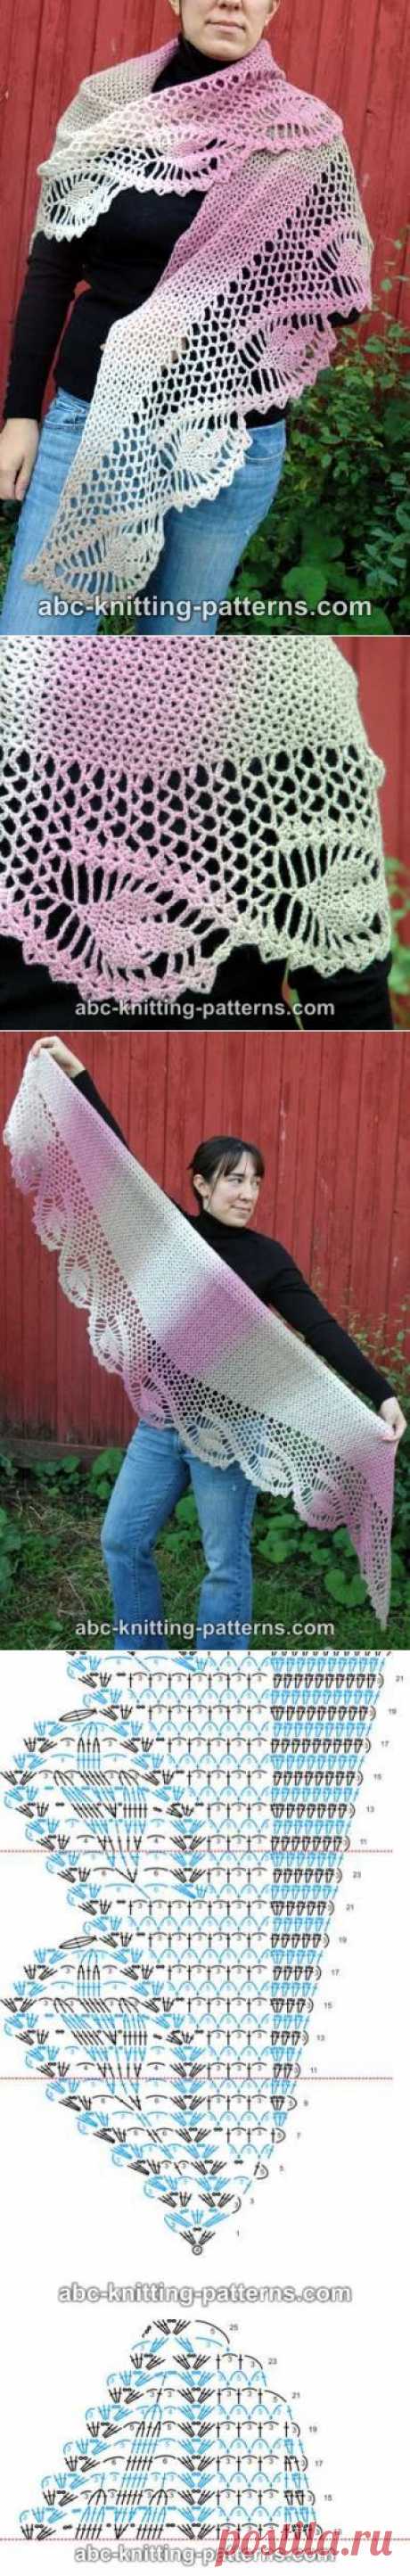 ABC Knitting Patterns - Dawn in the Woods Shawl.